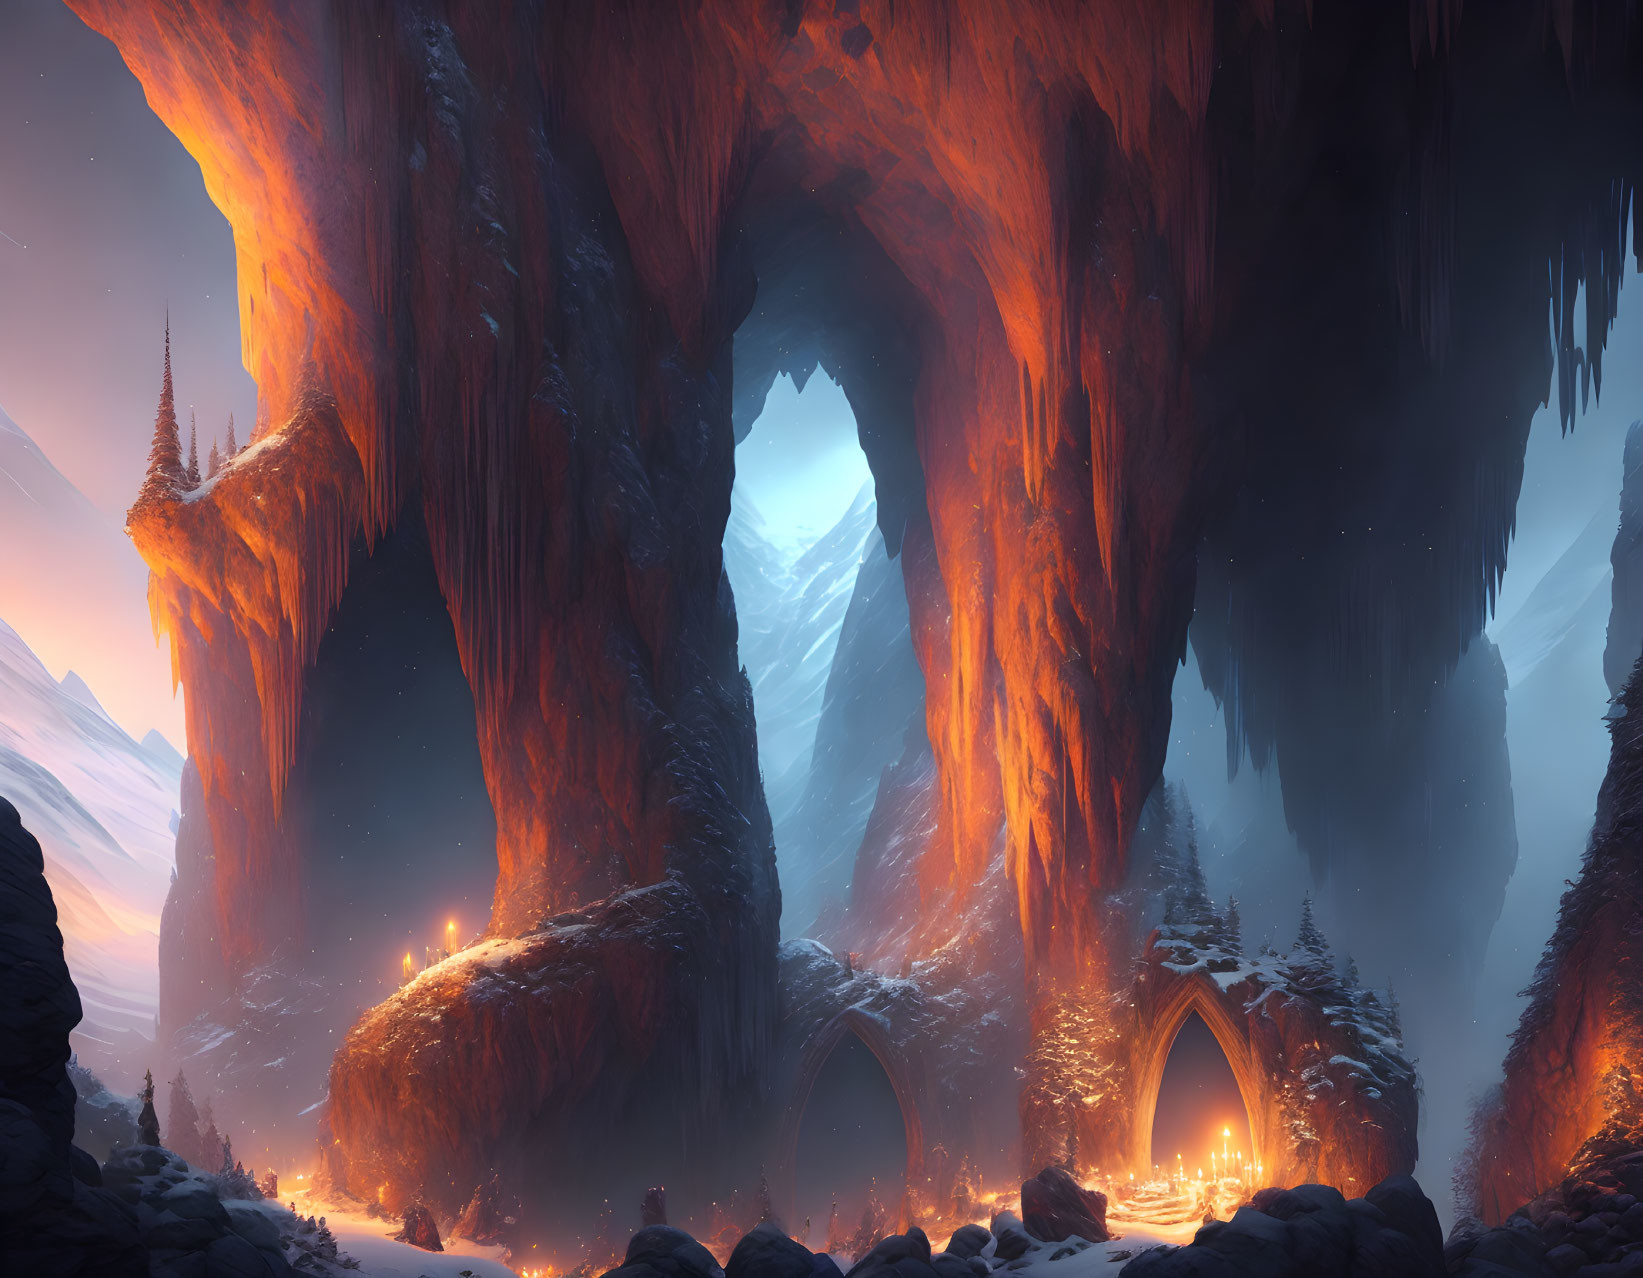 Mystical cave with fiery-red stalactites, glowing river, arching gateways.